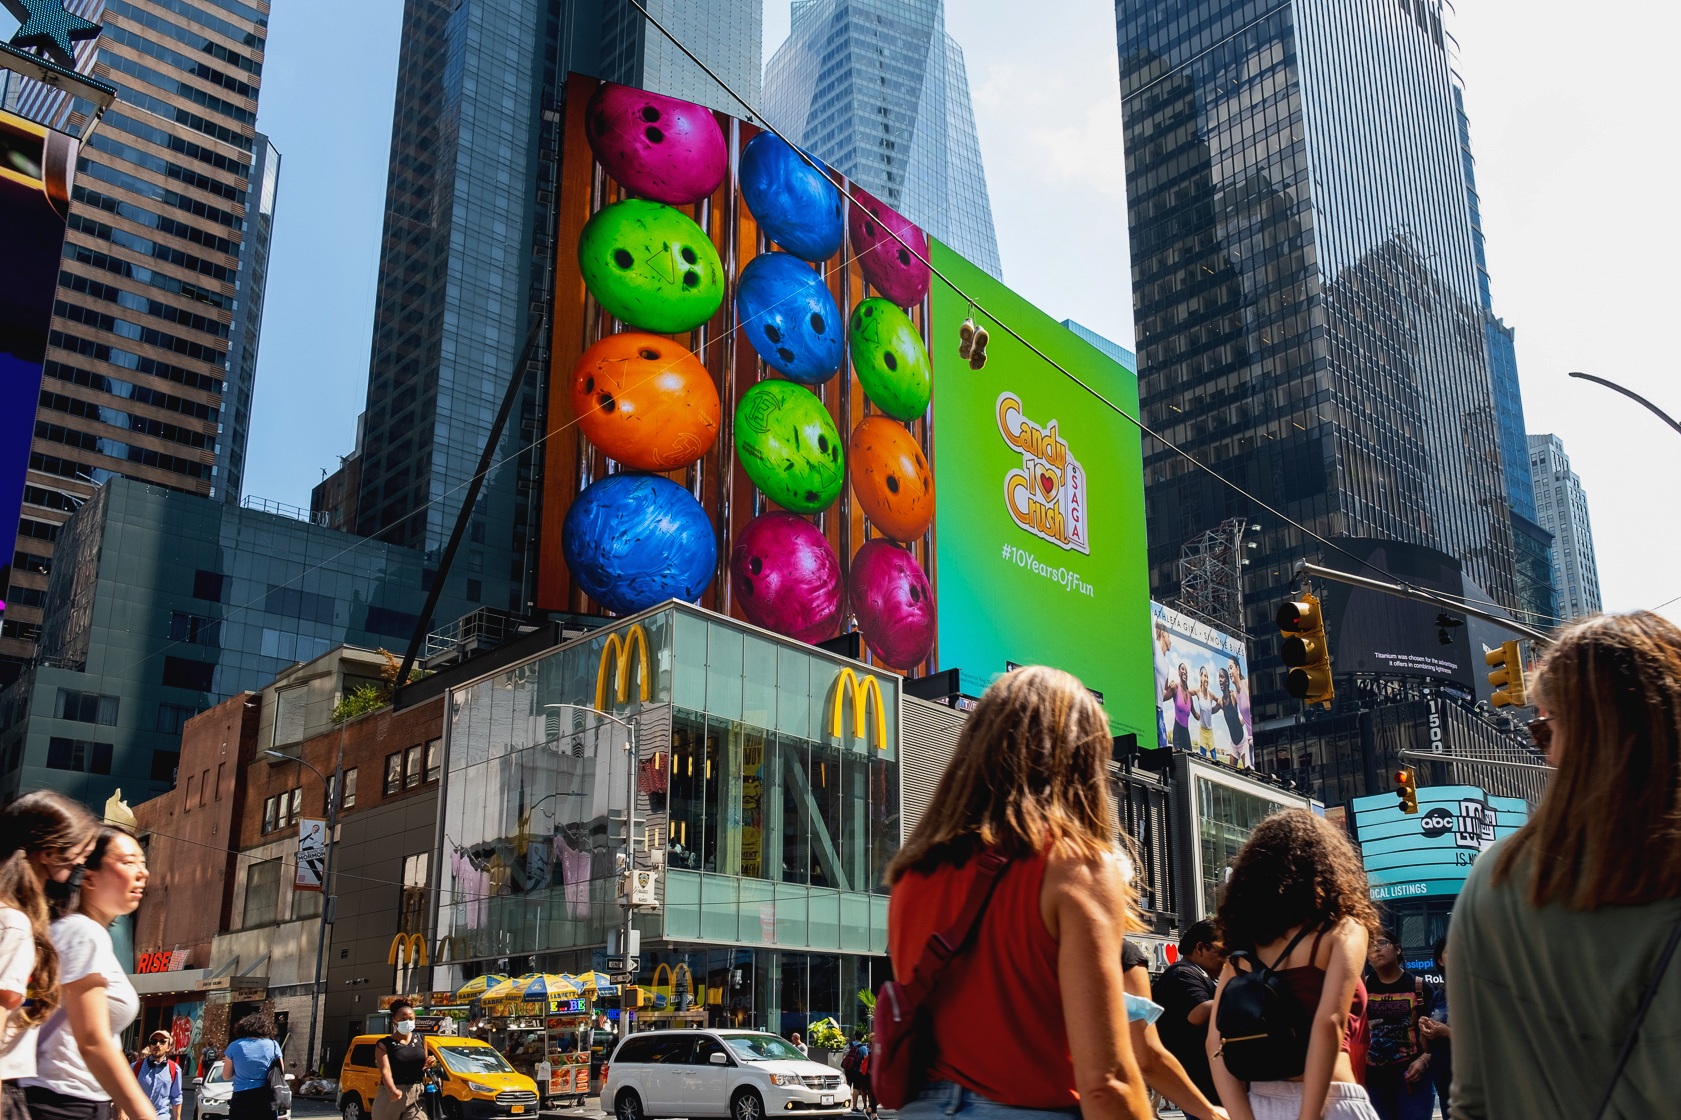 The latest Candy Crush Saga campaign gamifies the whole world and